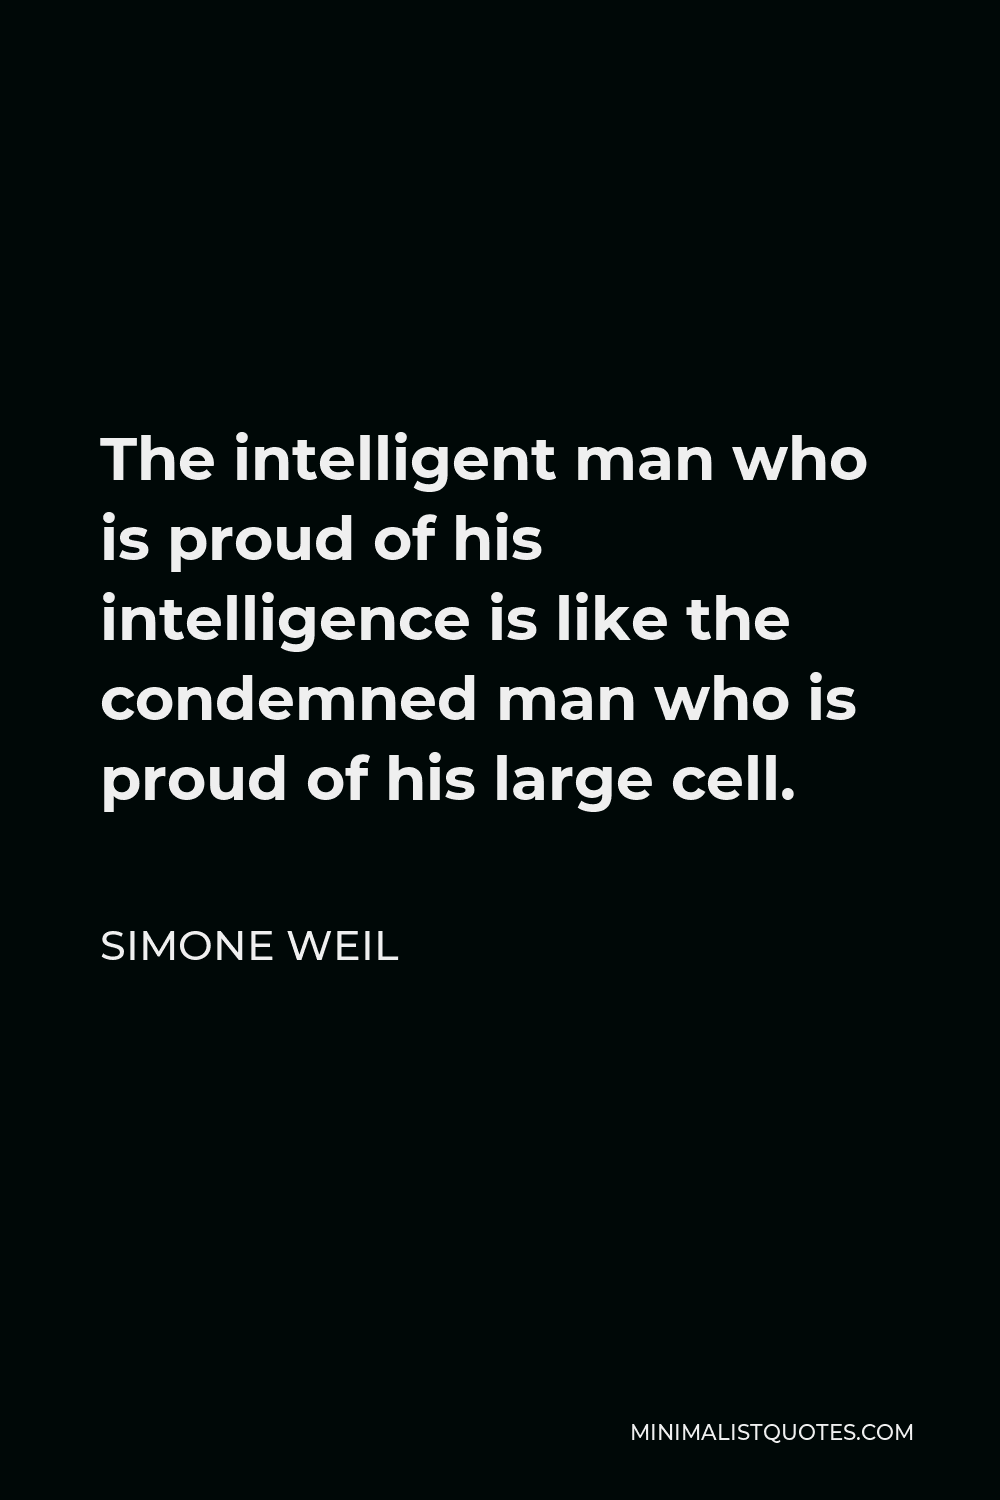 Simone Weil Quote - The intelligent man who is proud of his intelligence is like the condemned man who is proud of his large cell.